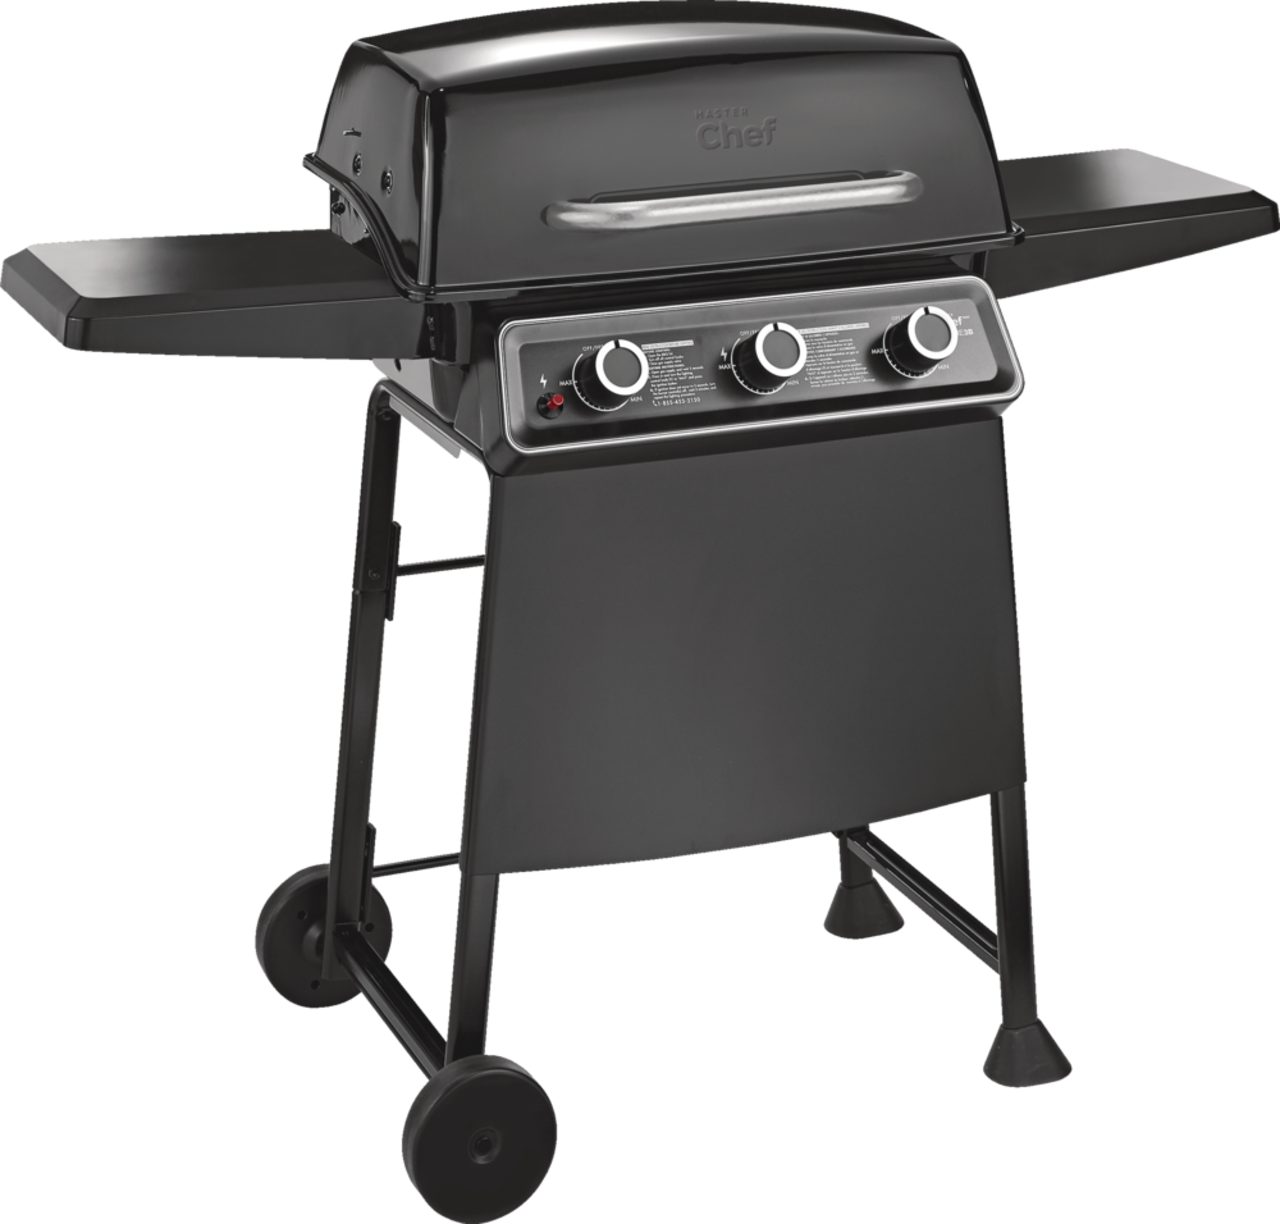 How to Check Your Propane Gas Grill or Fryer for Leaks